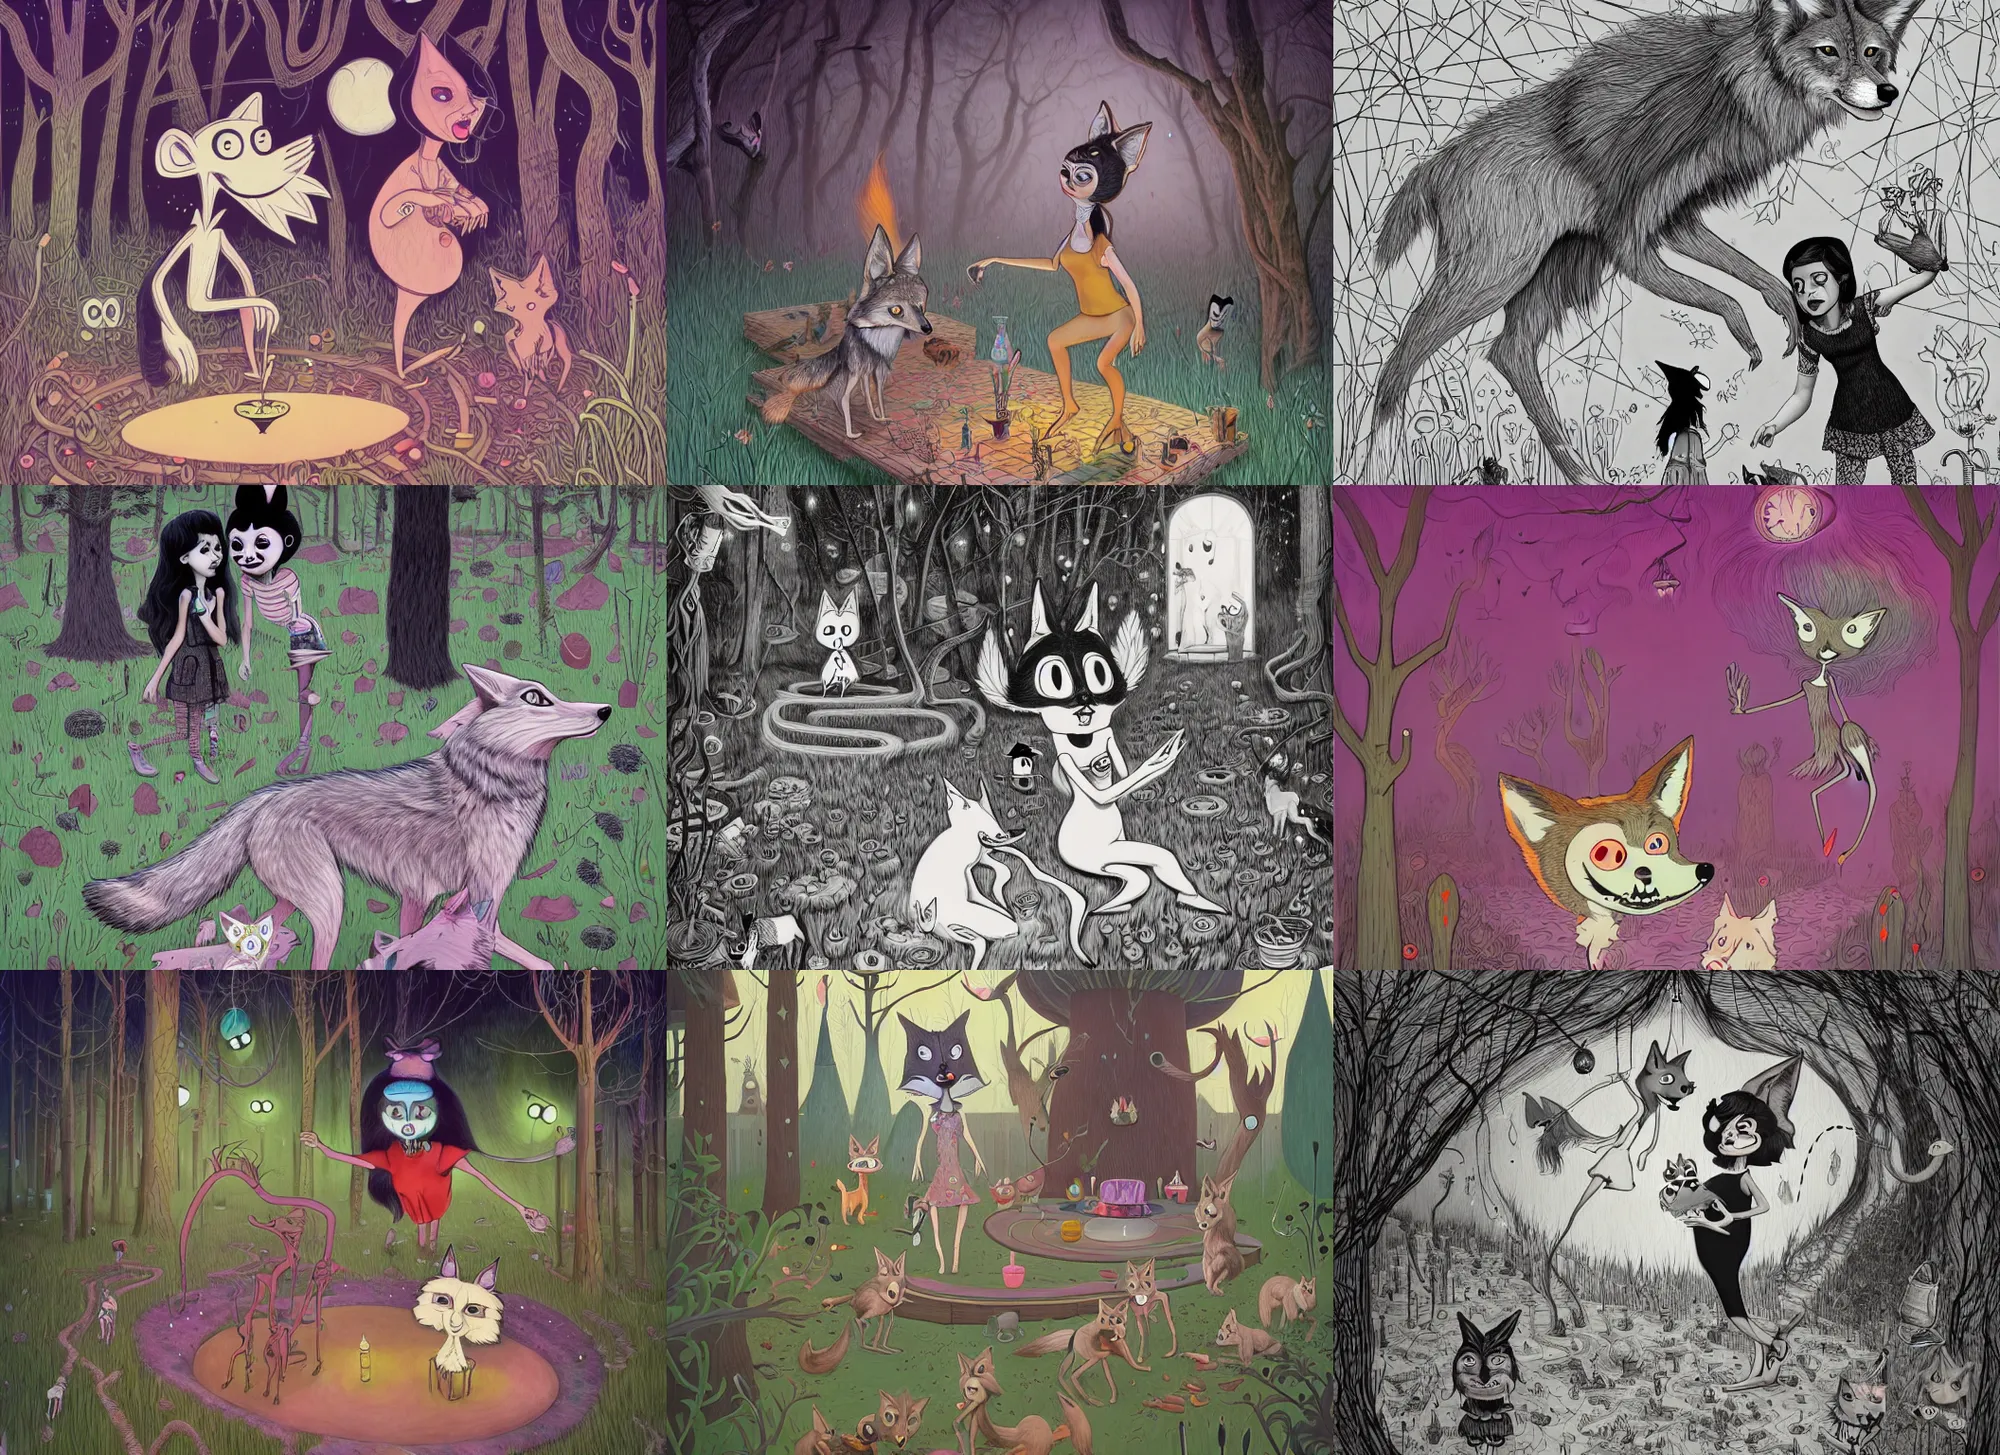 Prompt: a single magical coyote that crossed from another quantum dimension surprises a black haired girl while in her backyard. jon macnair, gary baseman, line drawing, carles dalmau, pedro correa, jakub rebelka, xiaofan zhang, artstation, intricate and highly detailed, nettie wakefield, monica langlois